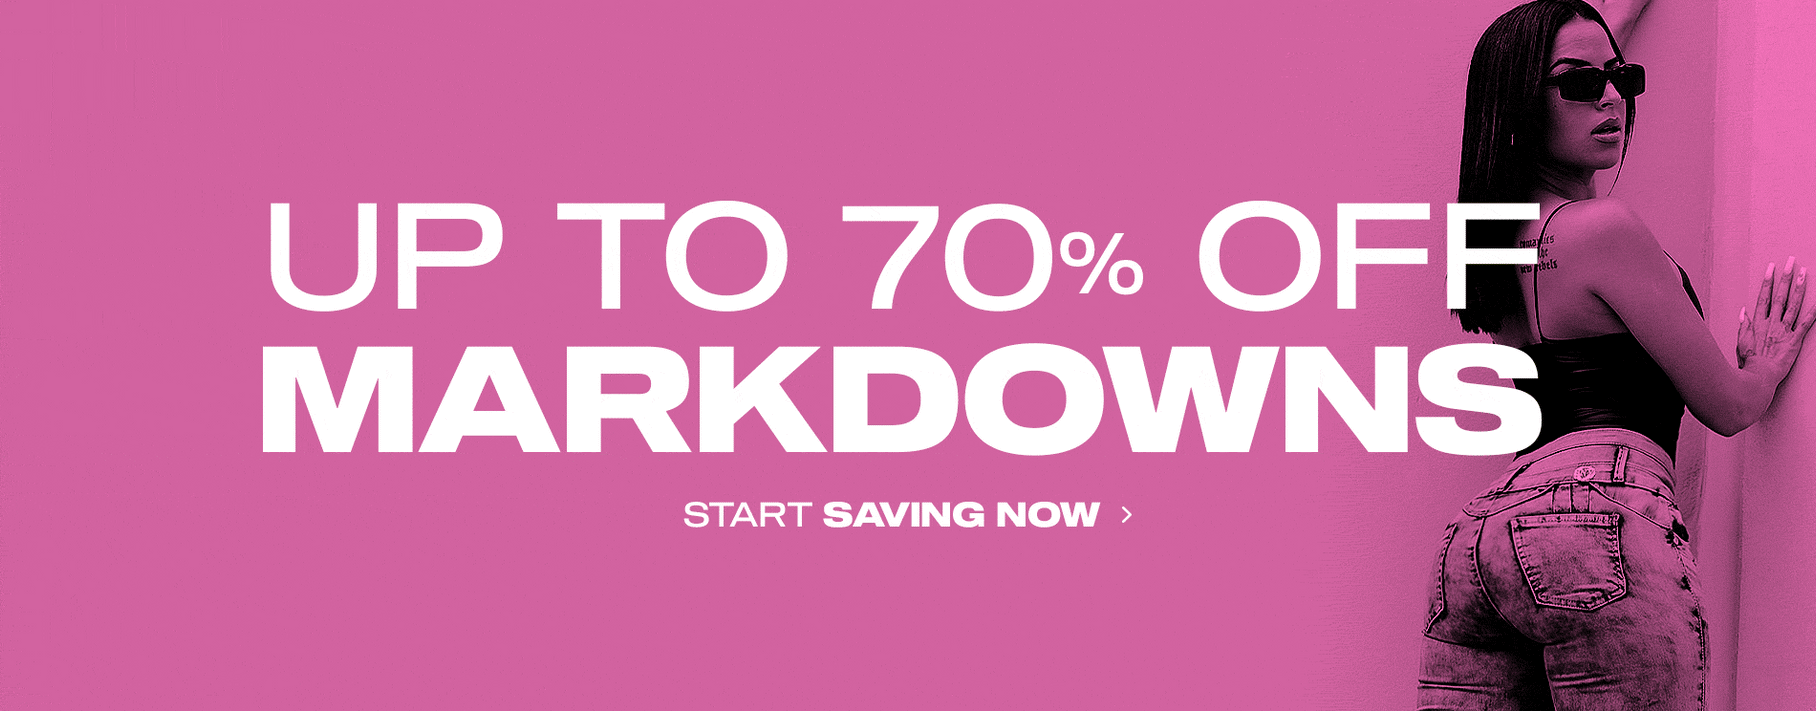 Up to 70% Off Markdowns: Start Saving Now